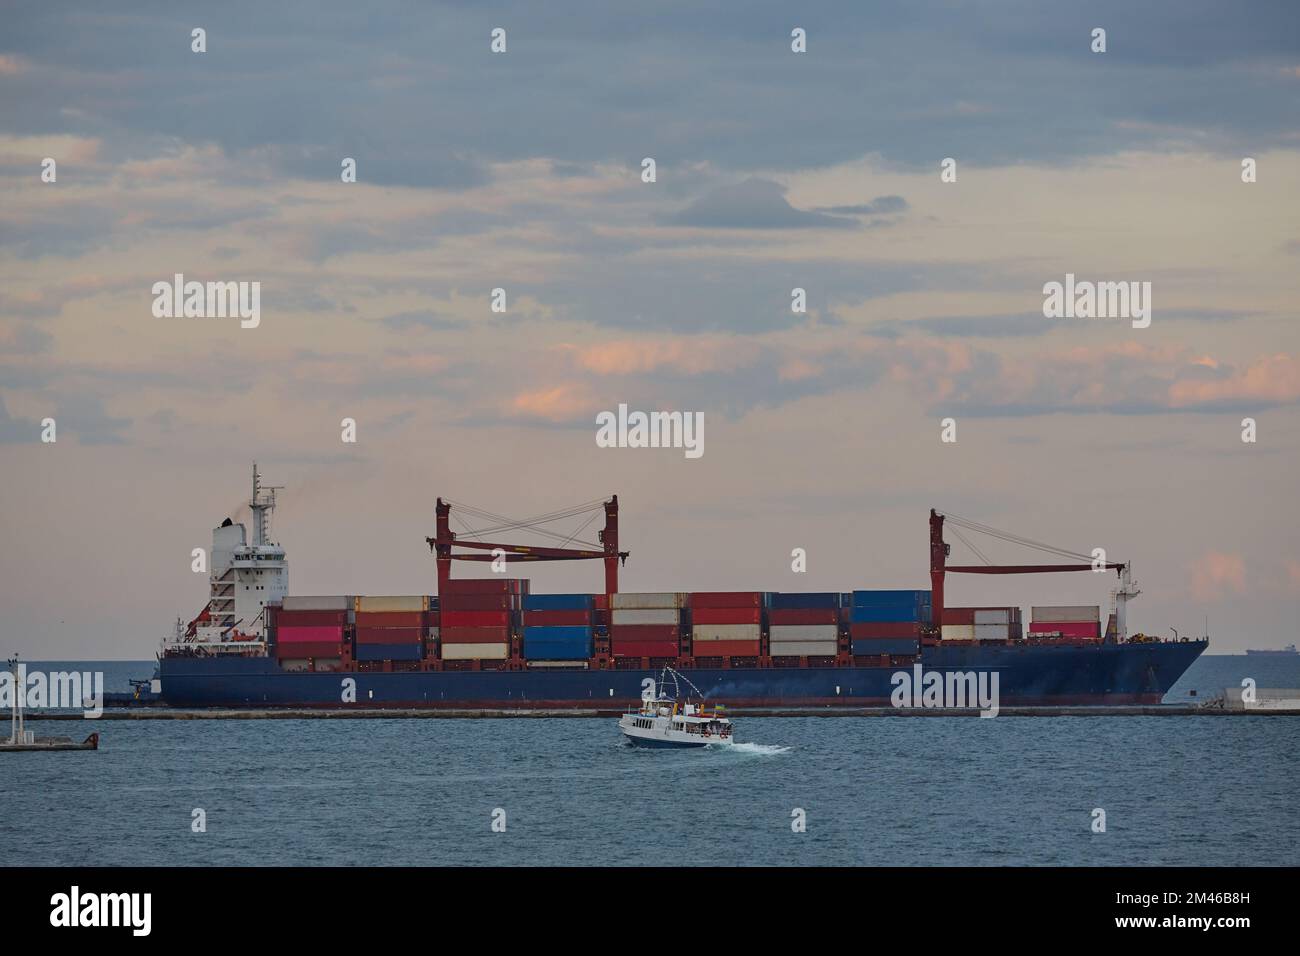 A large merchant ship container vessel in coastal waters of ocean. A merchant ship is moving around sea in daytime Stock Photo